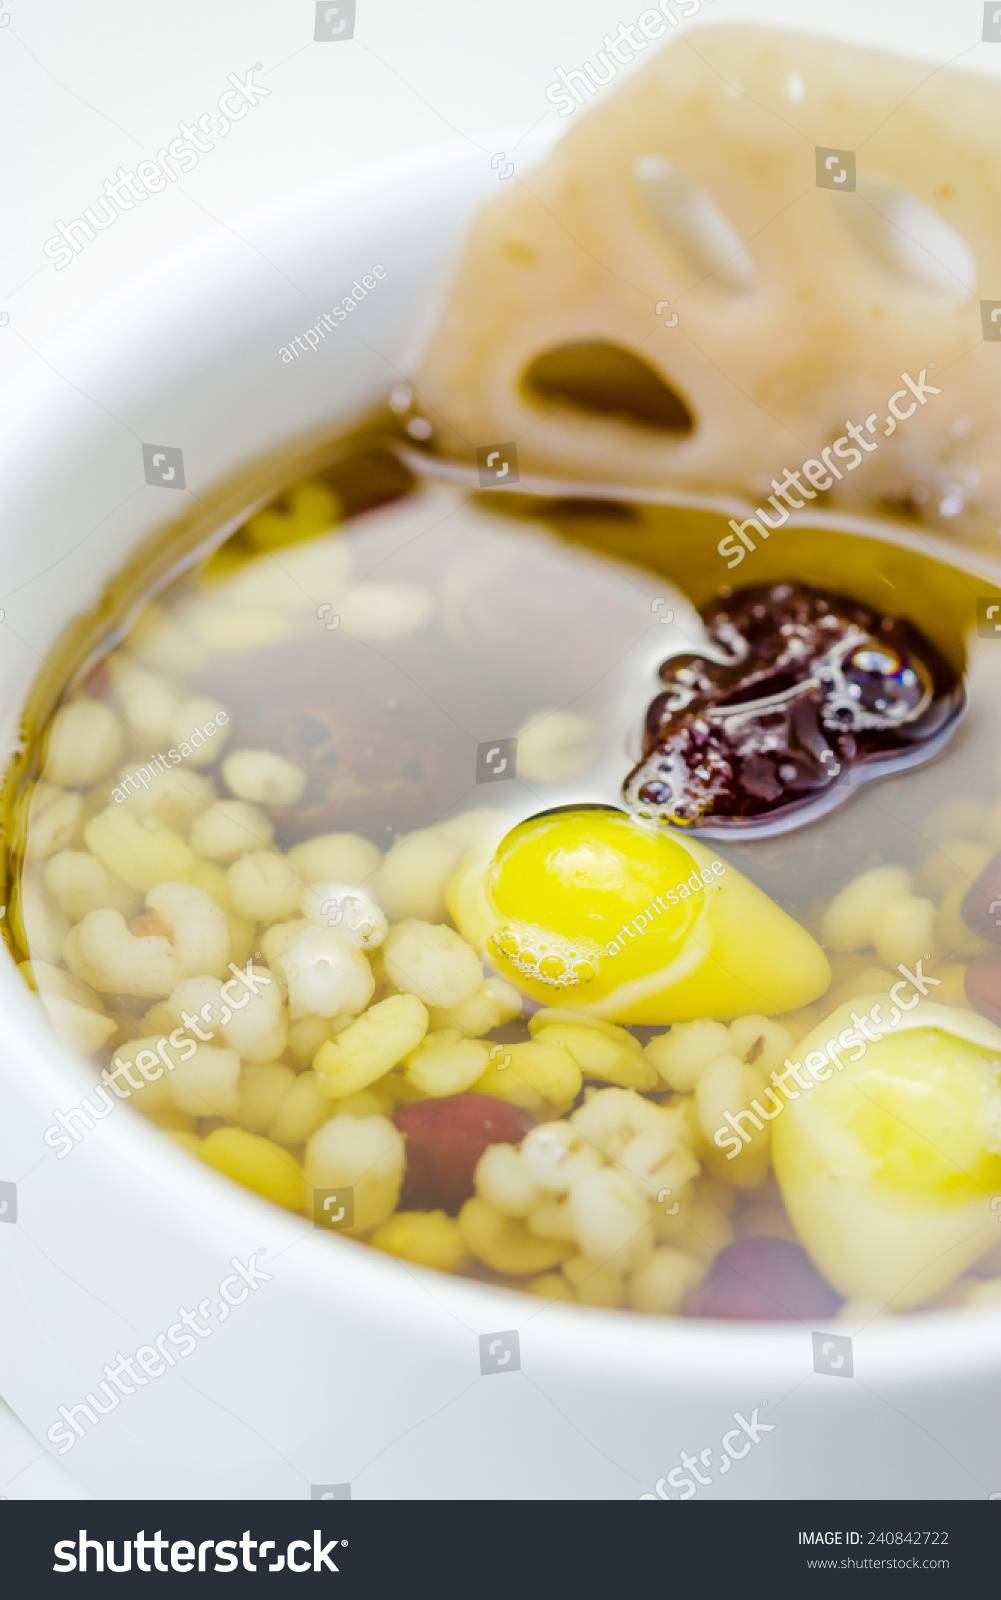 Lotus root and ginkgo nut in longan syrup, Chinese Dessert #240842722